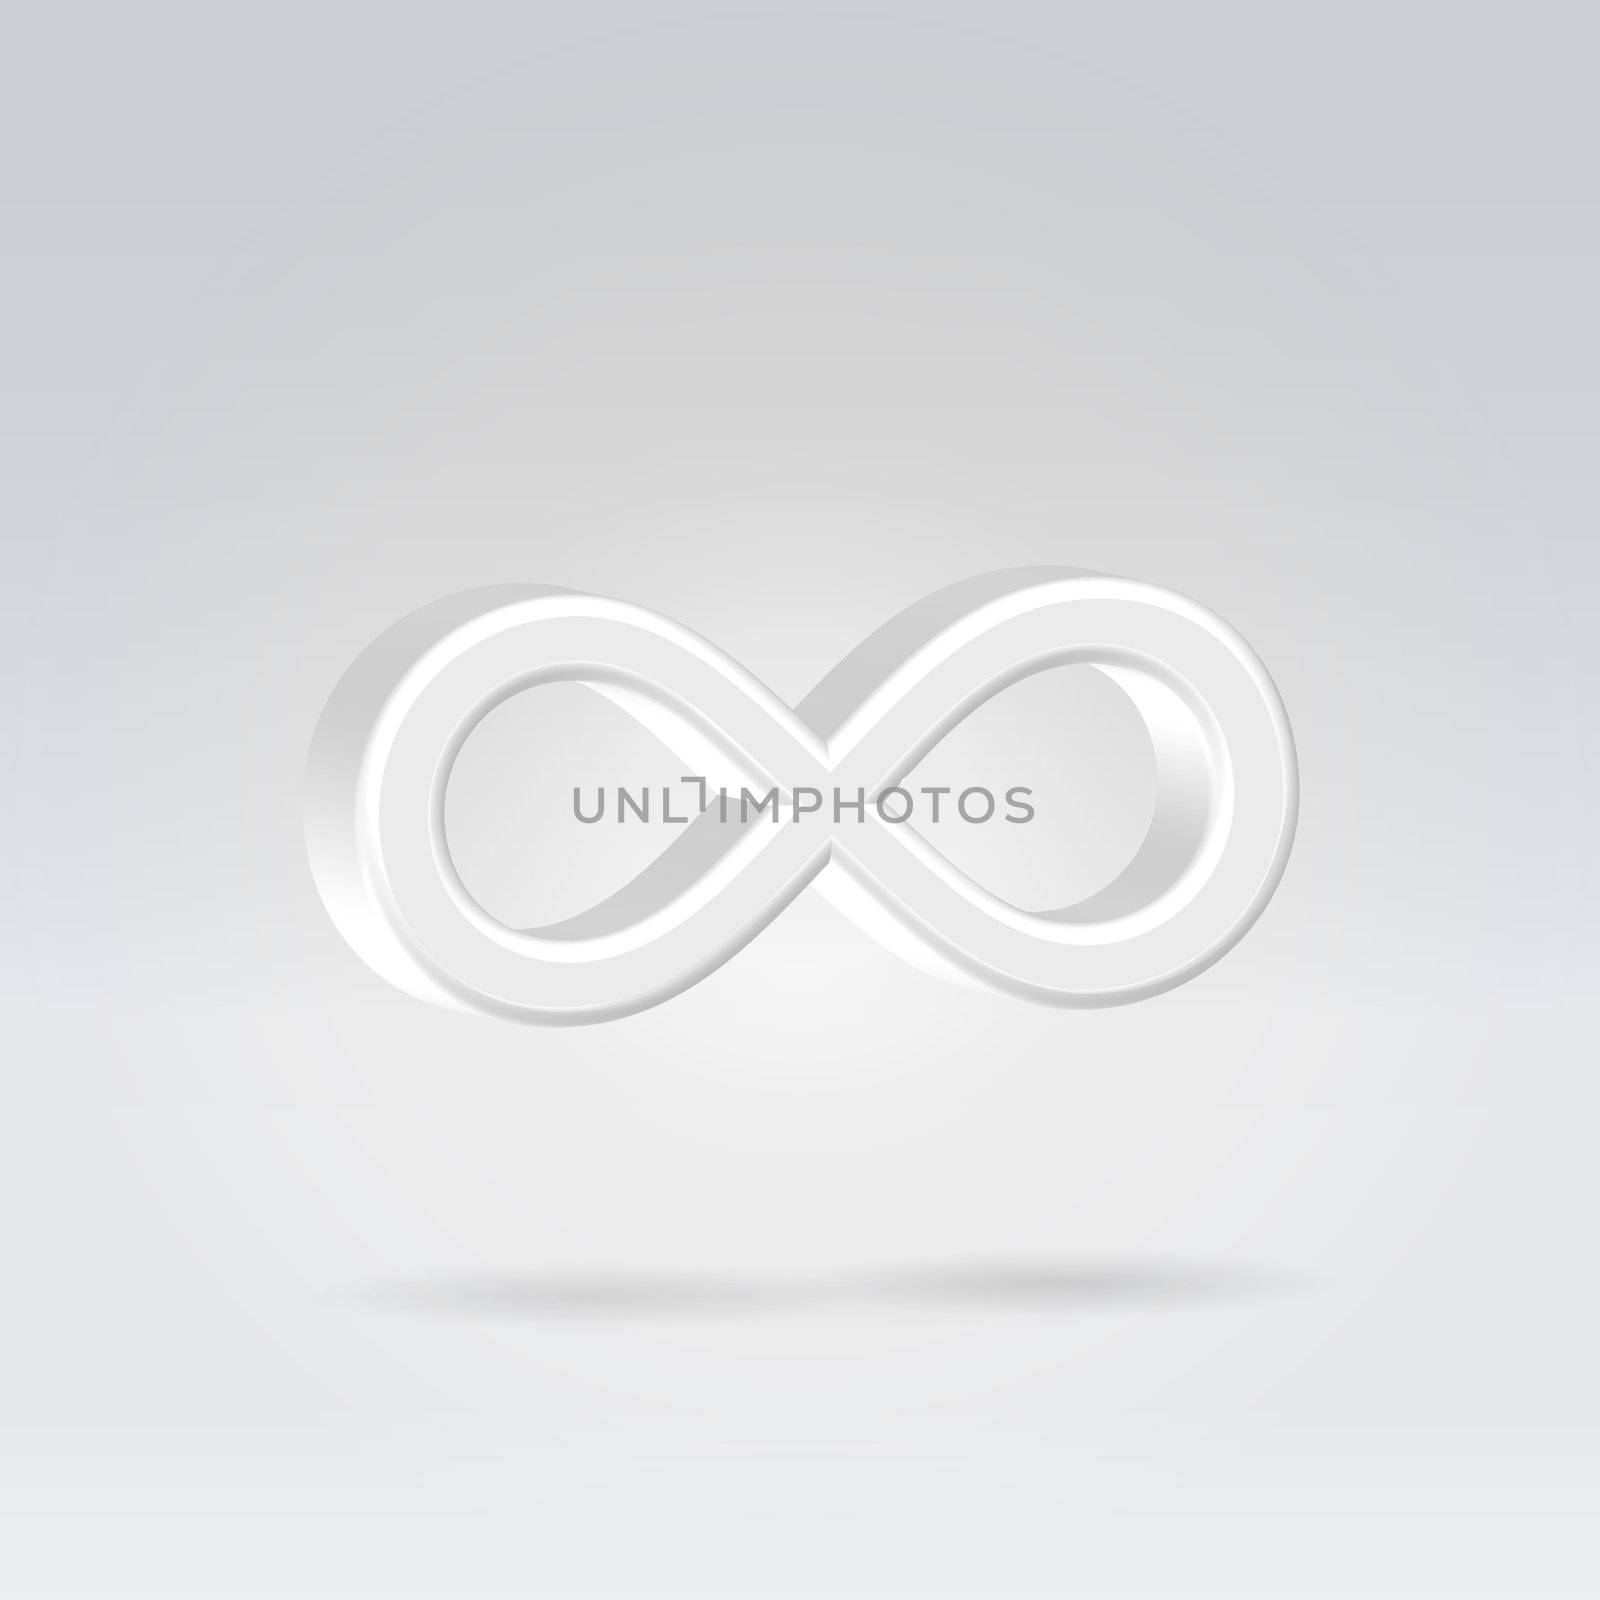 Glowing white silver bright infinity symbol 3d closeup backlit hanging in space